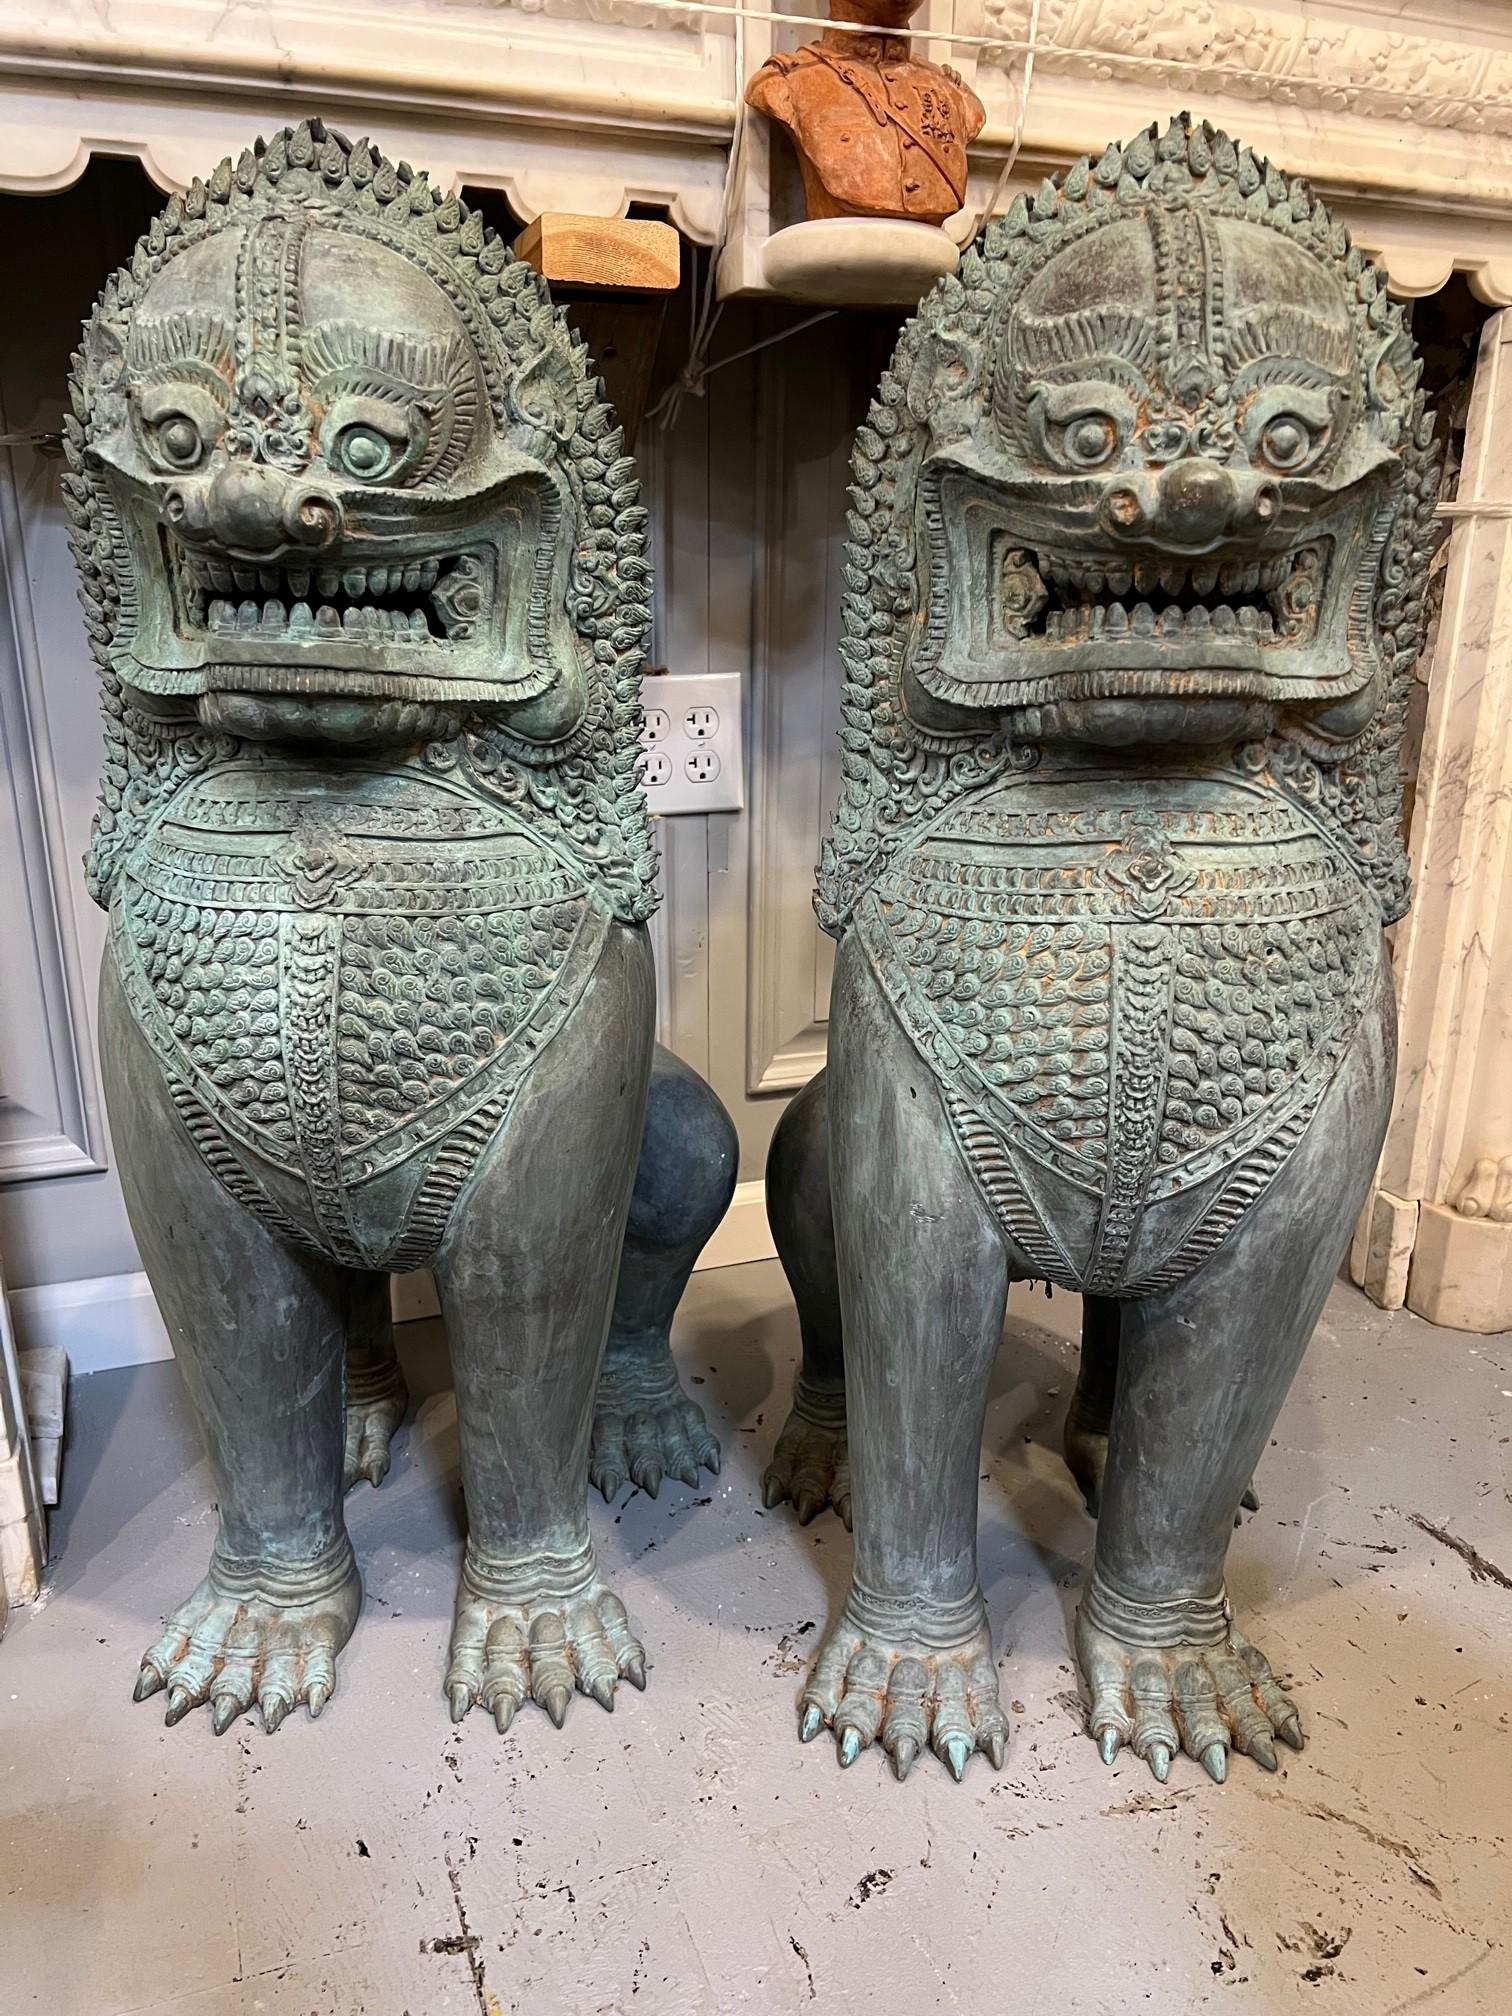 A magnificent pair of bronze Singha Temple Lions, a Thai mythical creature in the form of a lion that has been a big part of Thai history guarding the entrances to the many Buddhist Temples.  It is common to see a pair of theses mythical lions